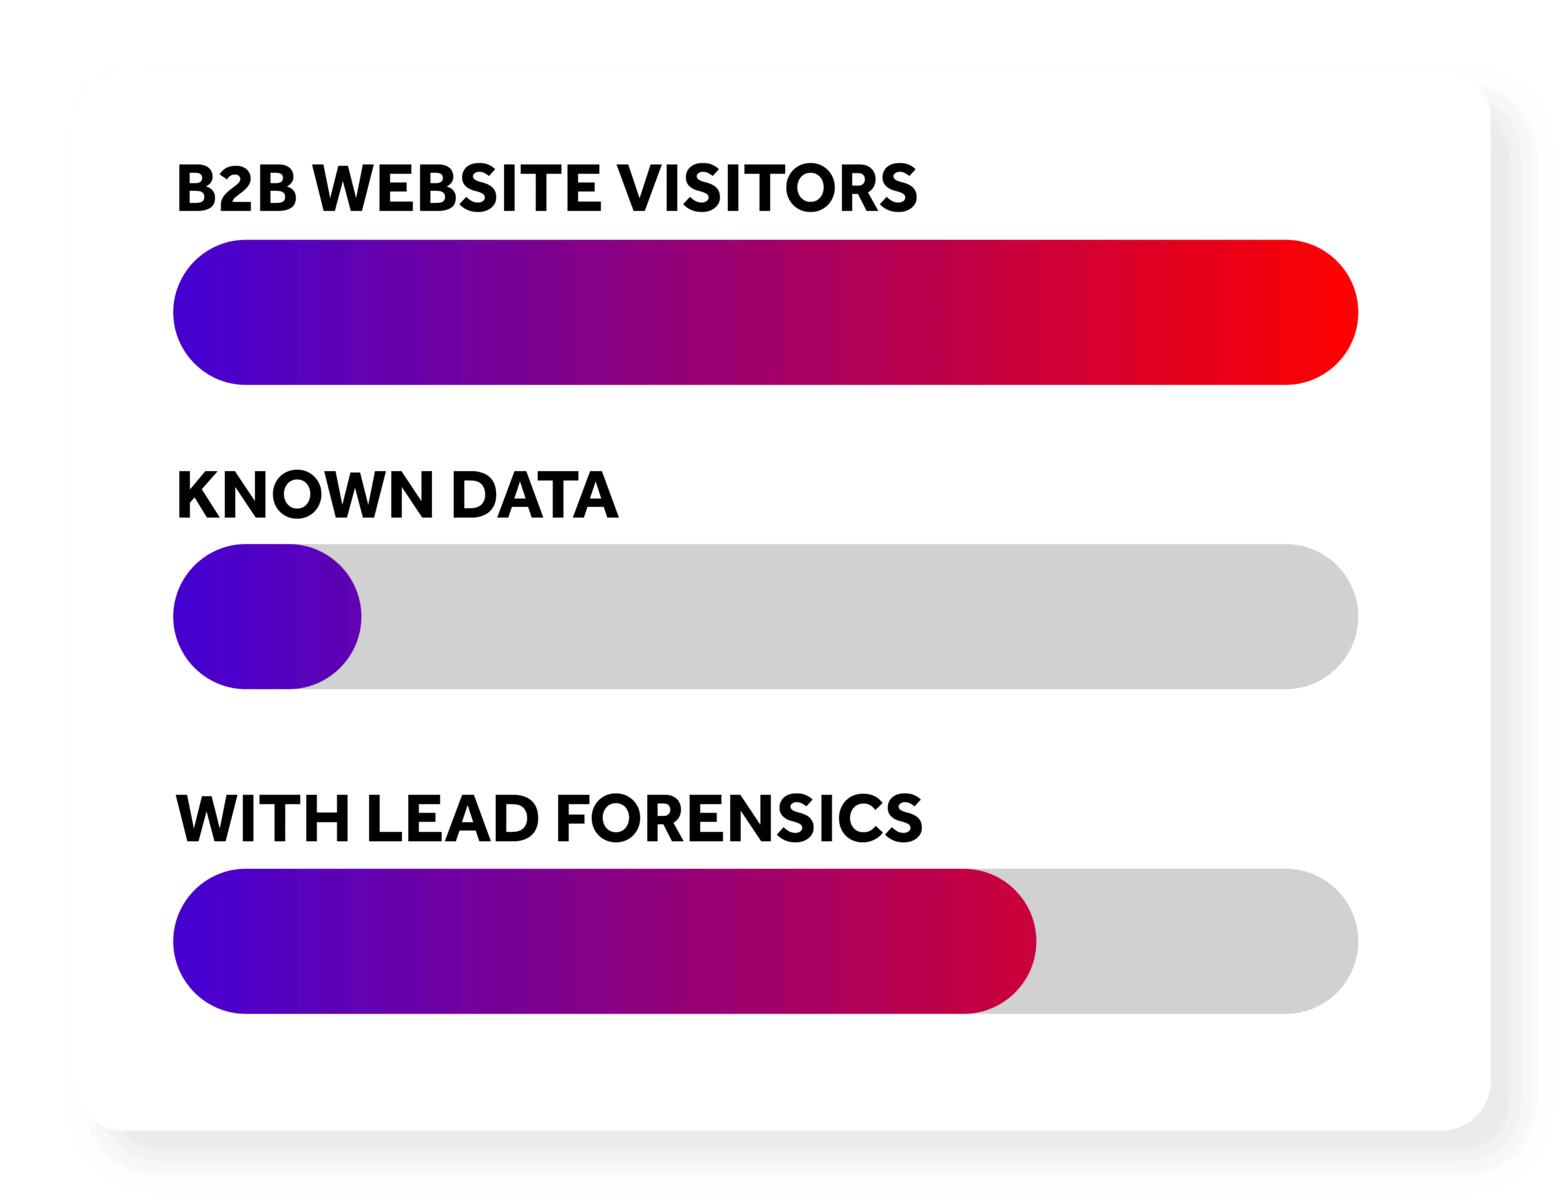 Lead Forensics product features